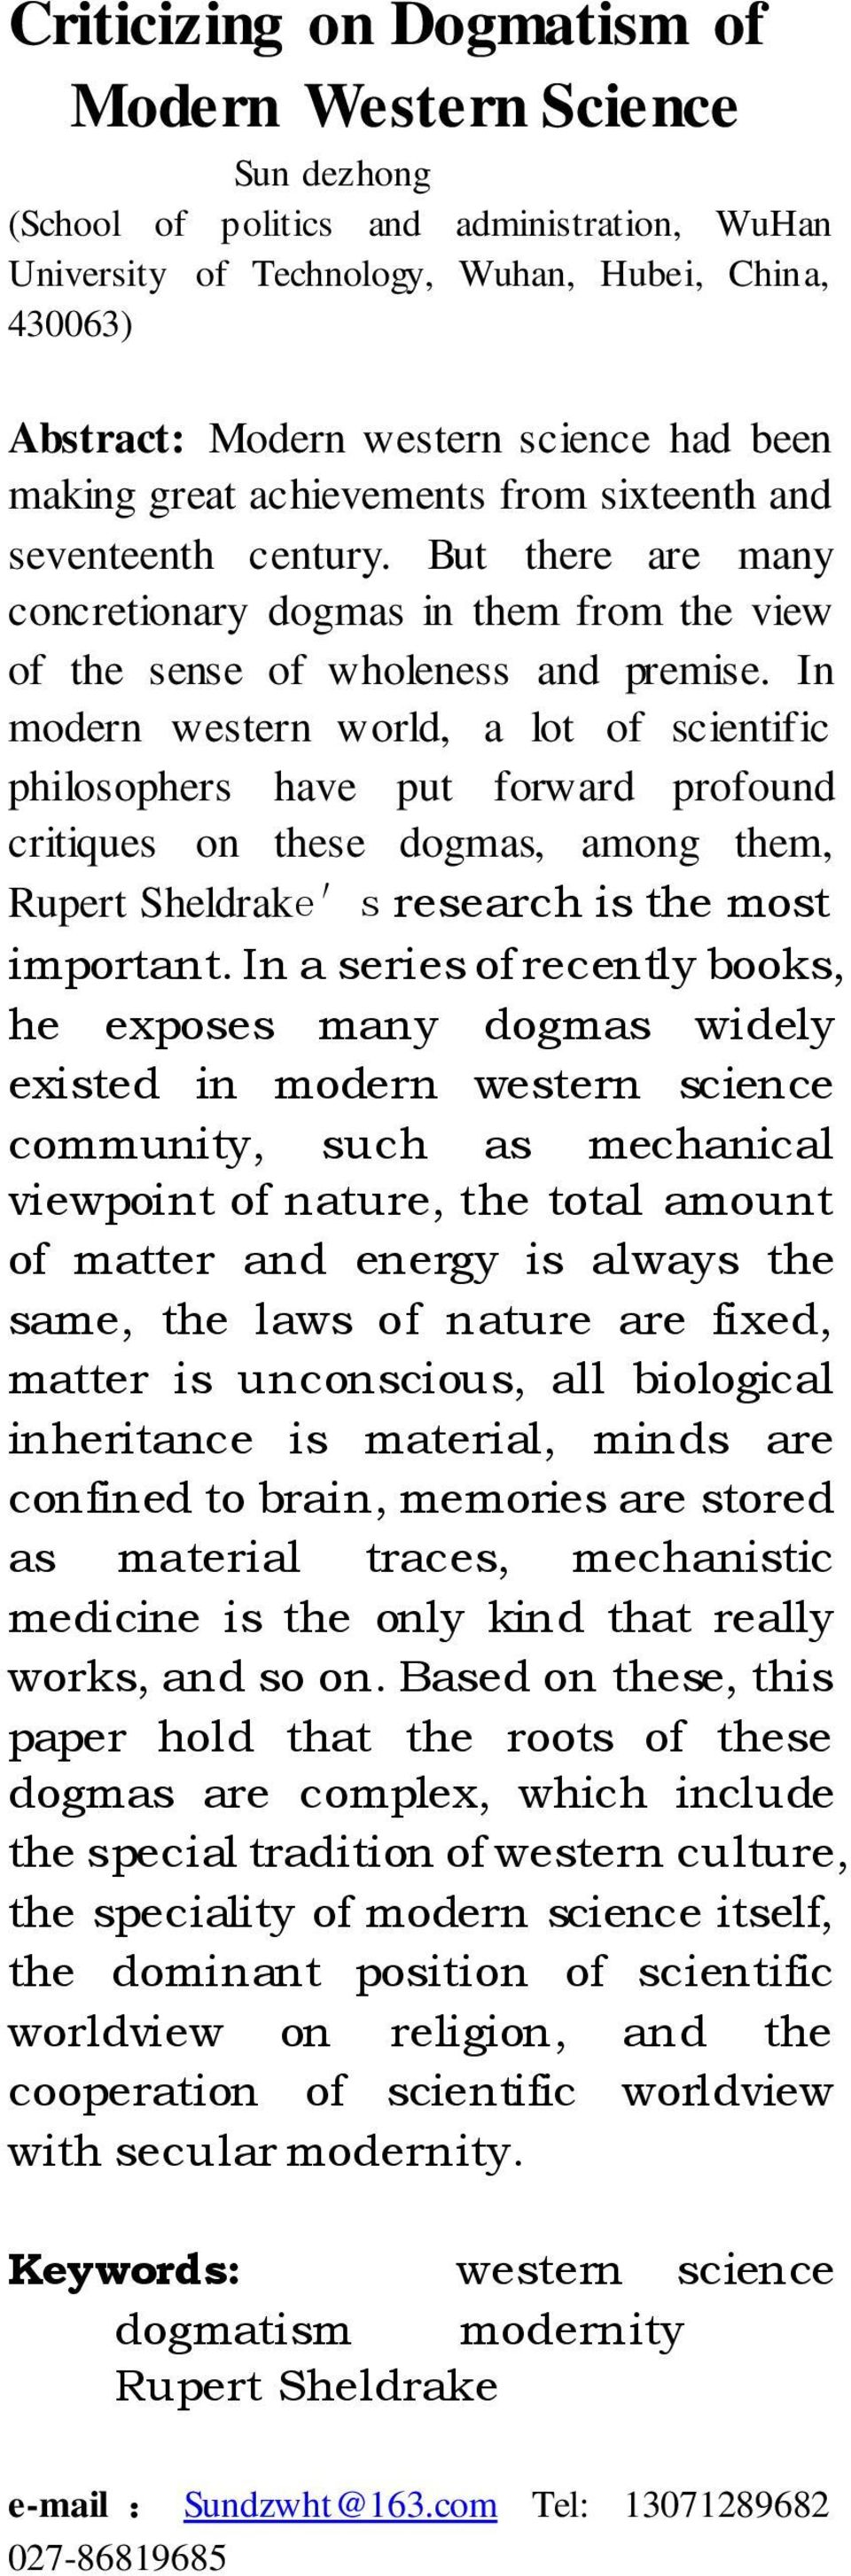 In modern western world, a lot of scientific philosophers have put forward profound critiques on these dogmas, among them, Rupert Sheldrake s research is the most important.